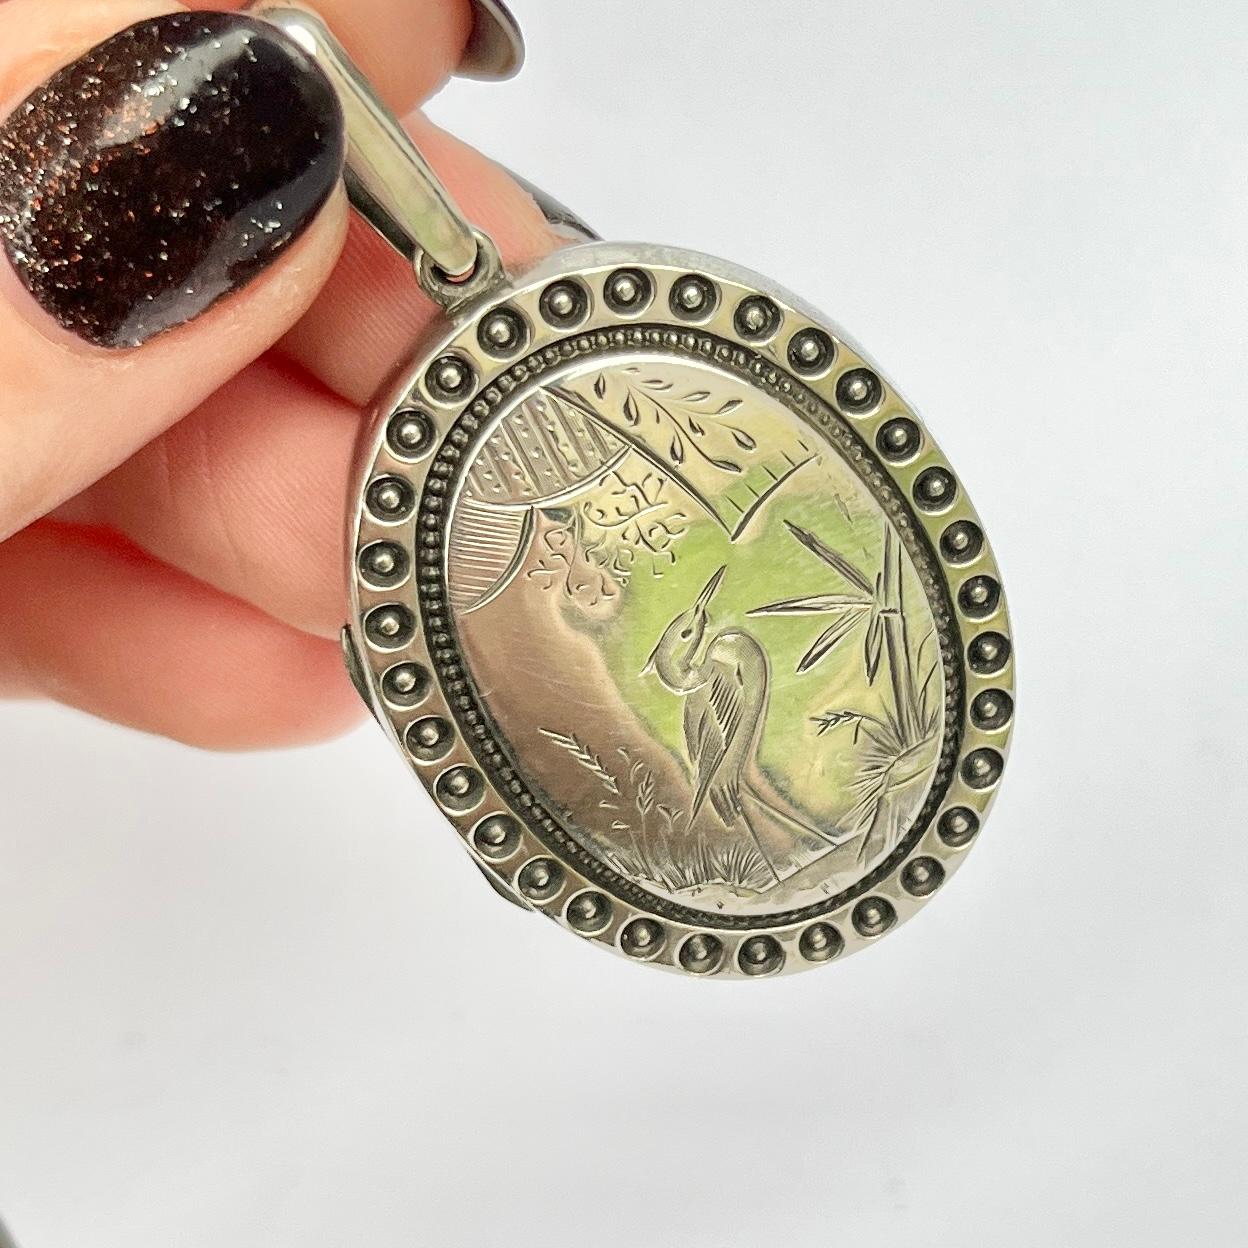 On one side of this beautiful locket there is engraving of a heron with a beautifully ornate frame surrounding it. The other side of this locket is decorative and finely engraved. 

Dimensions: 37x30mm

Weight: 10.1g